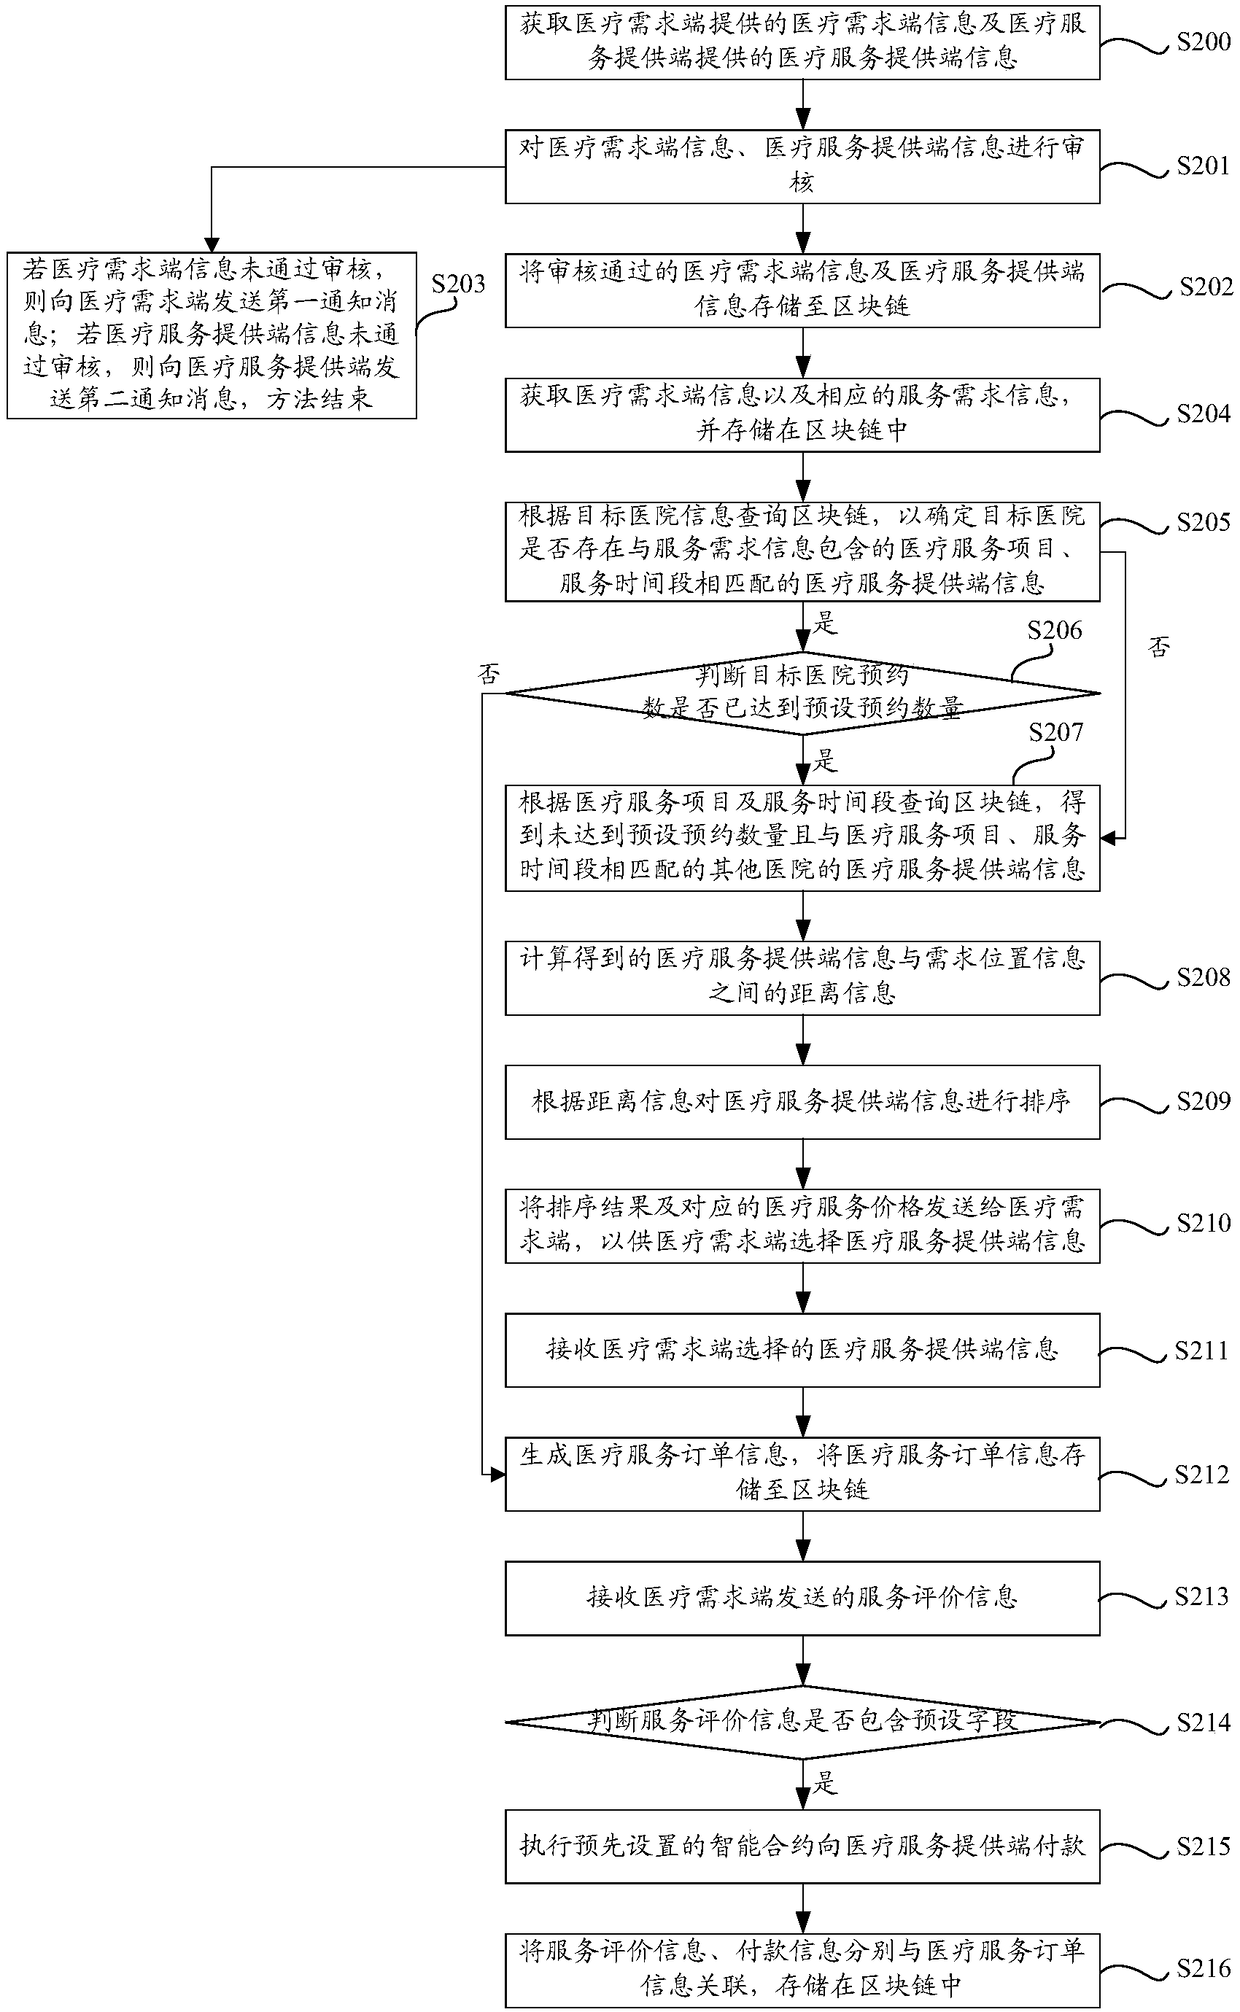 Blockchain-based medical resource data processing method and device